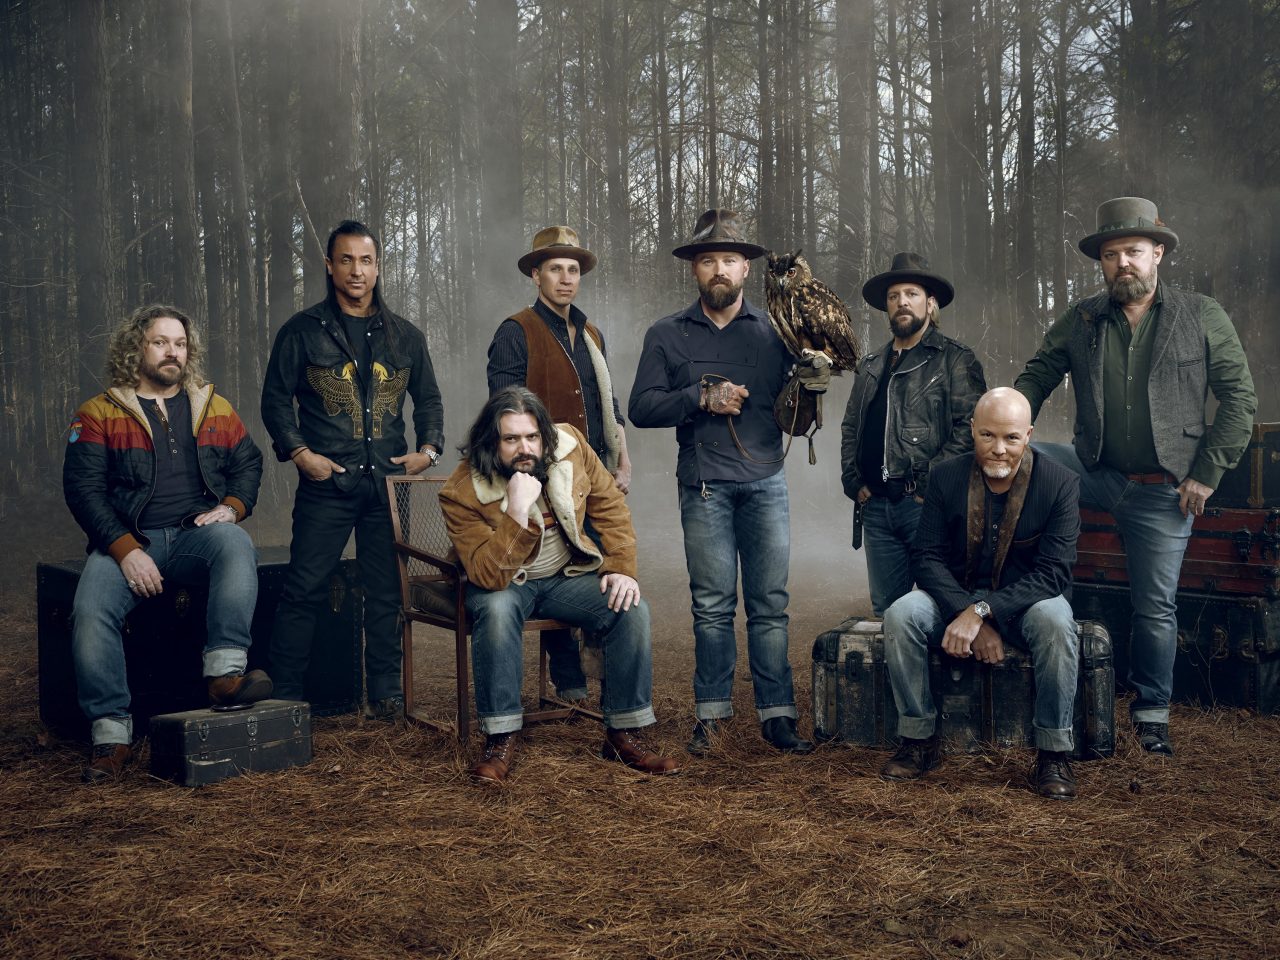 Album Review: Zac Brown Band’s ‘The Owl’